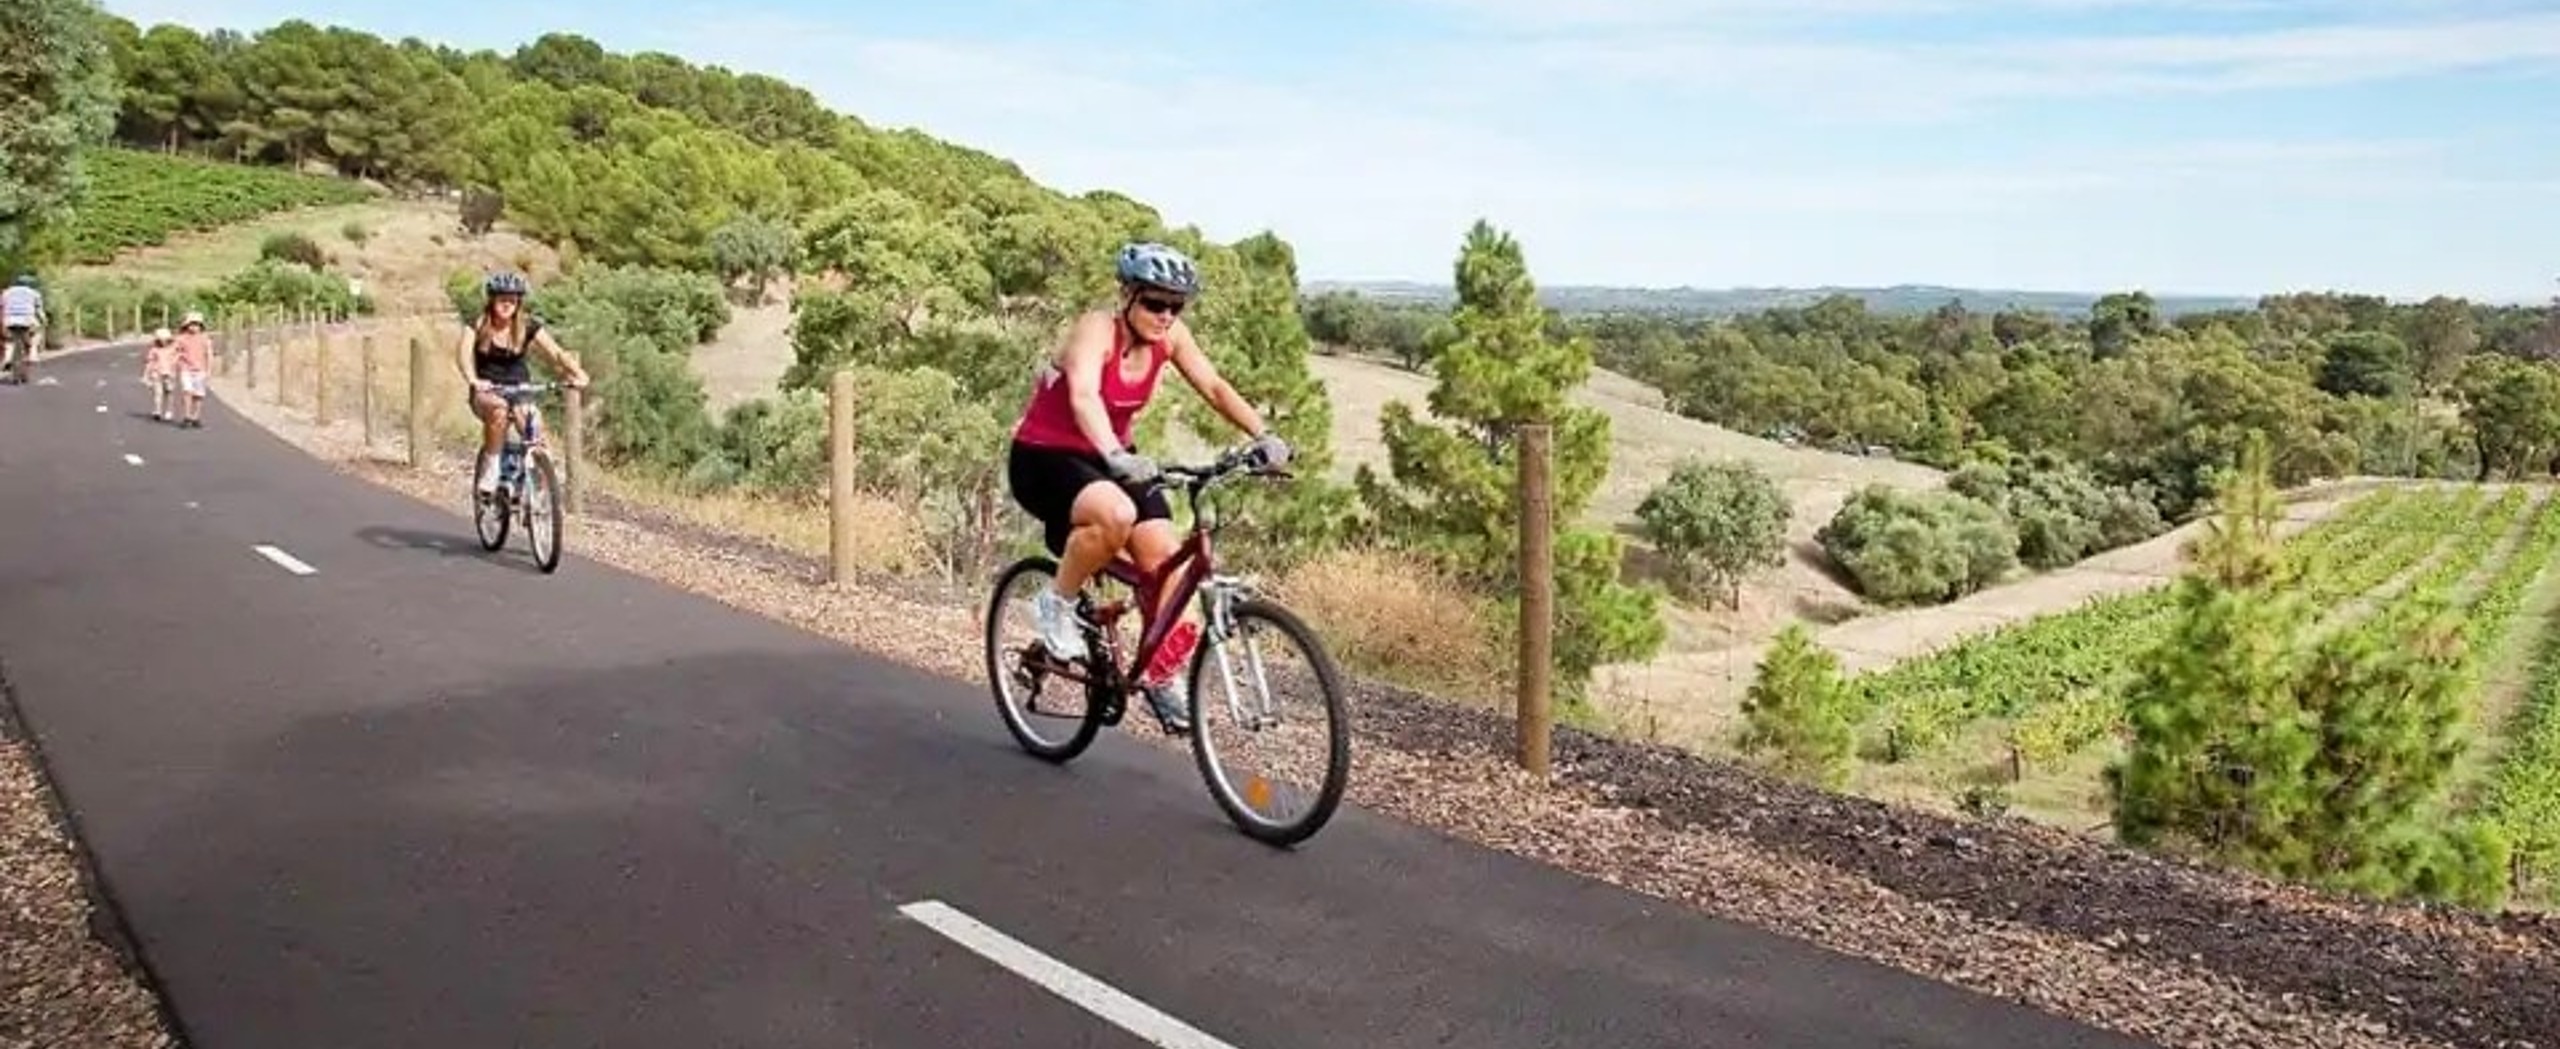 Barossa and Clare Valley Cycling Tour